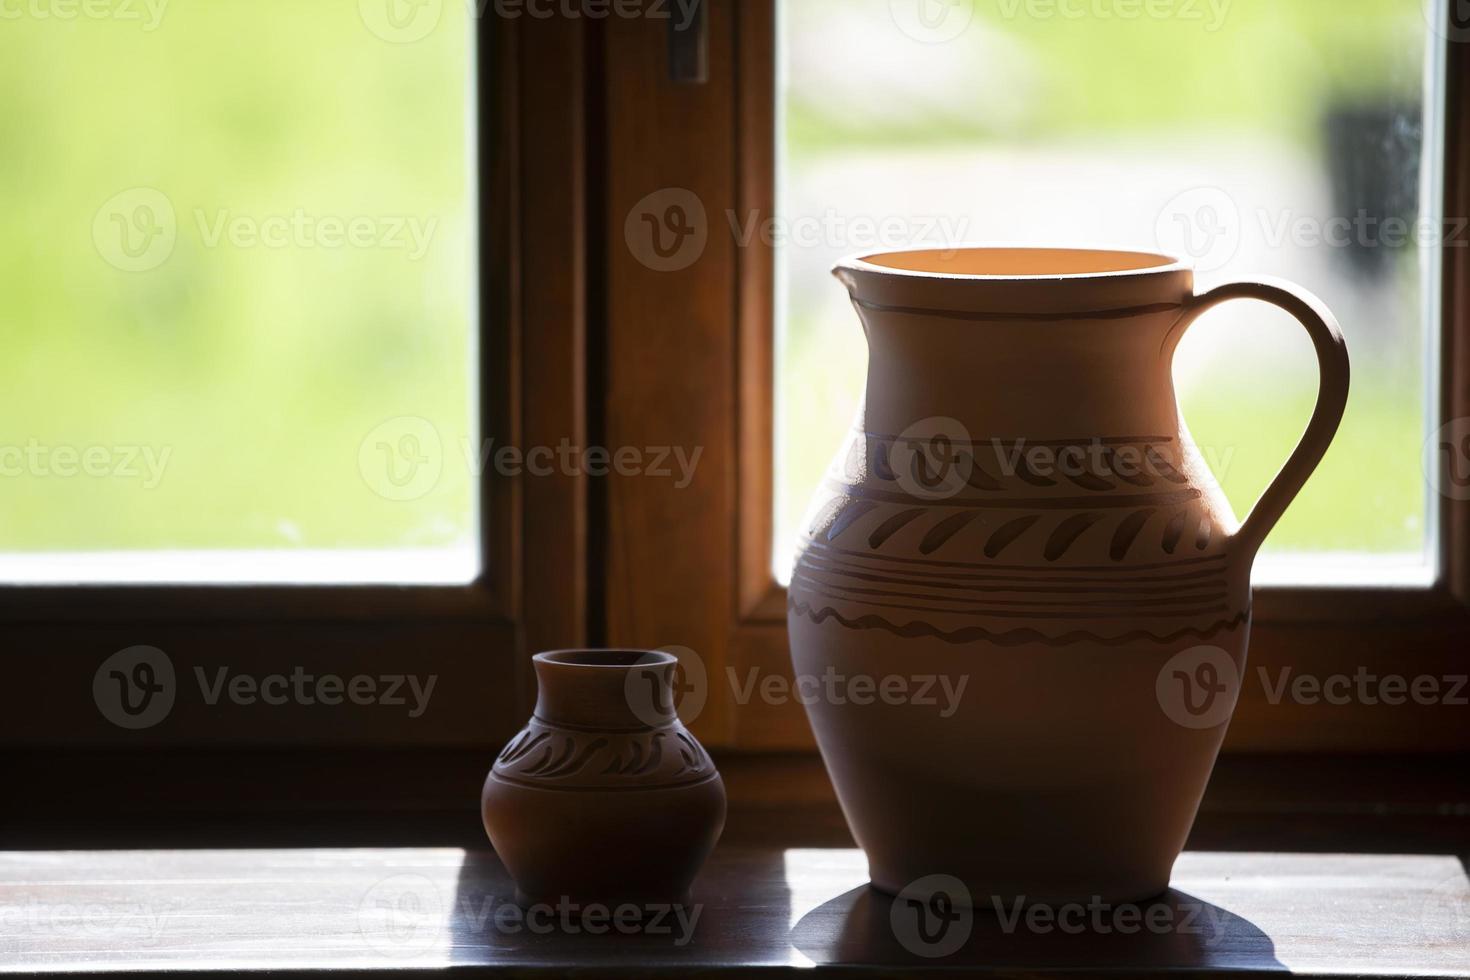 On the windowsill there are rustic clay jugs. photo